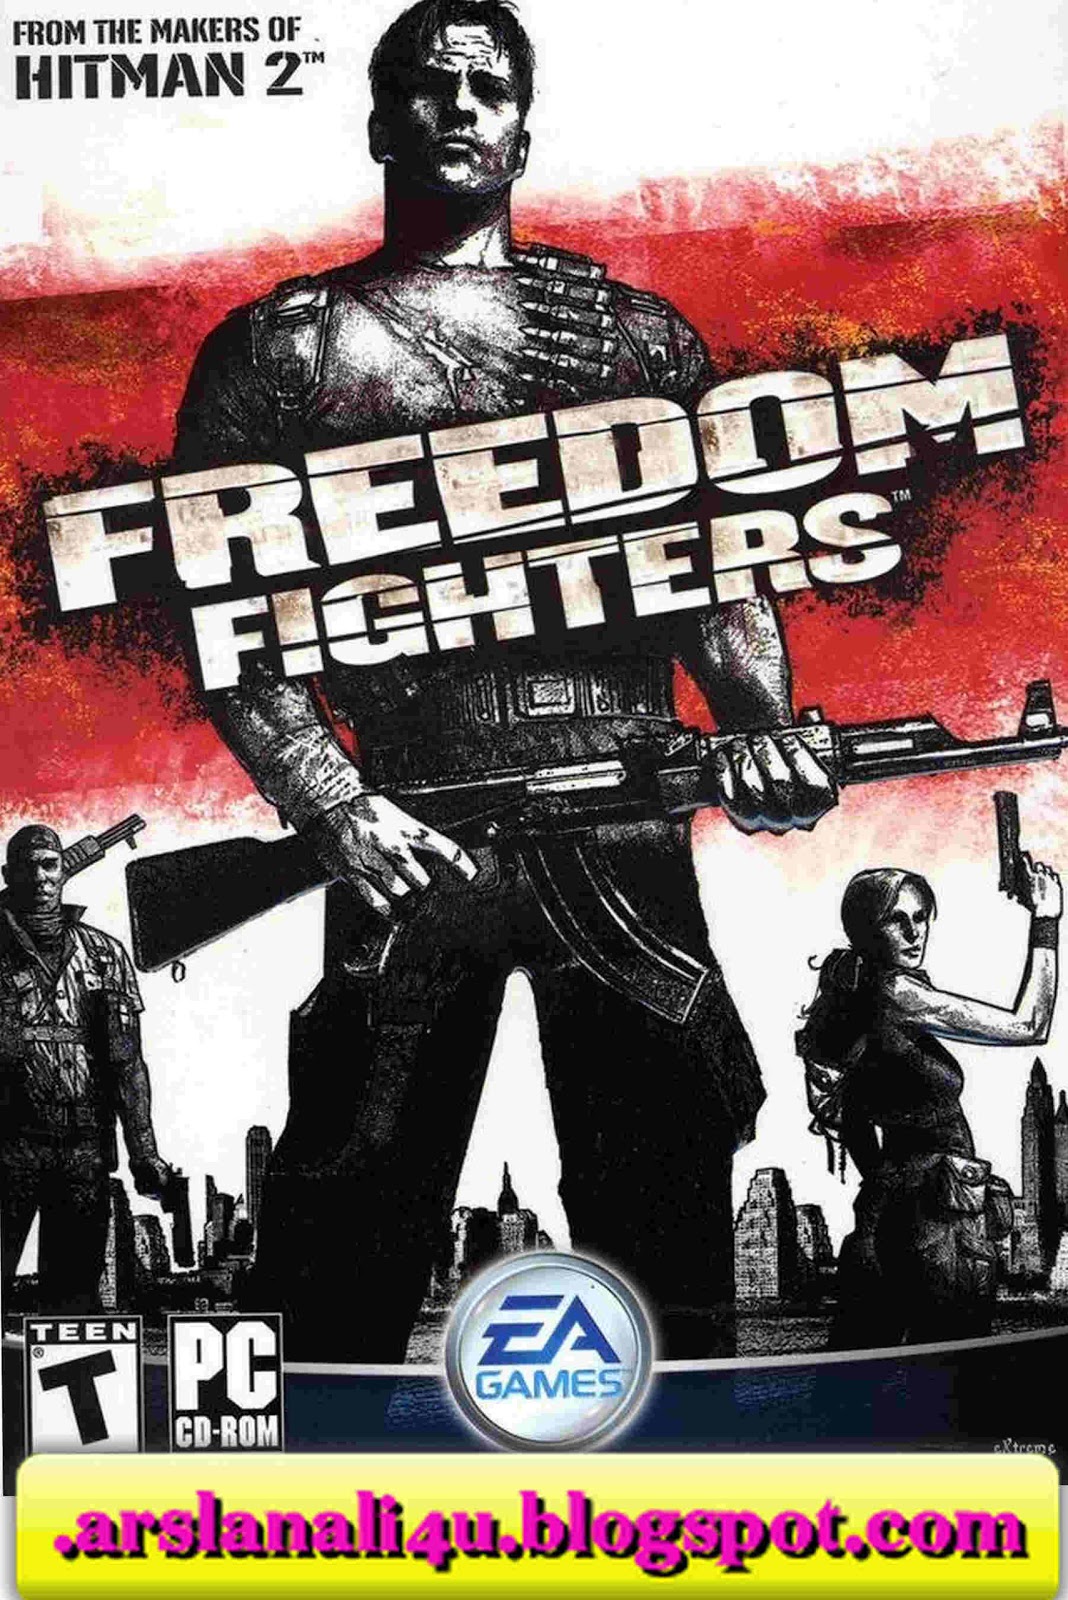 freedom fighters game free pc